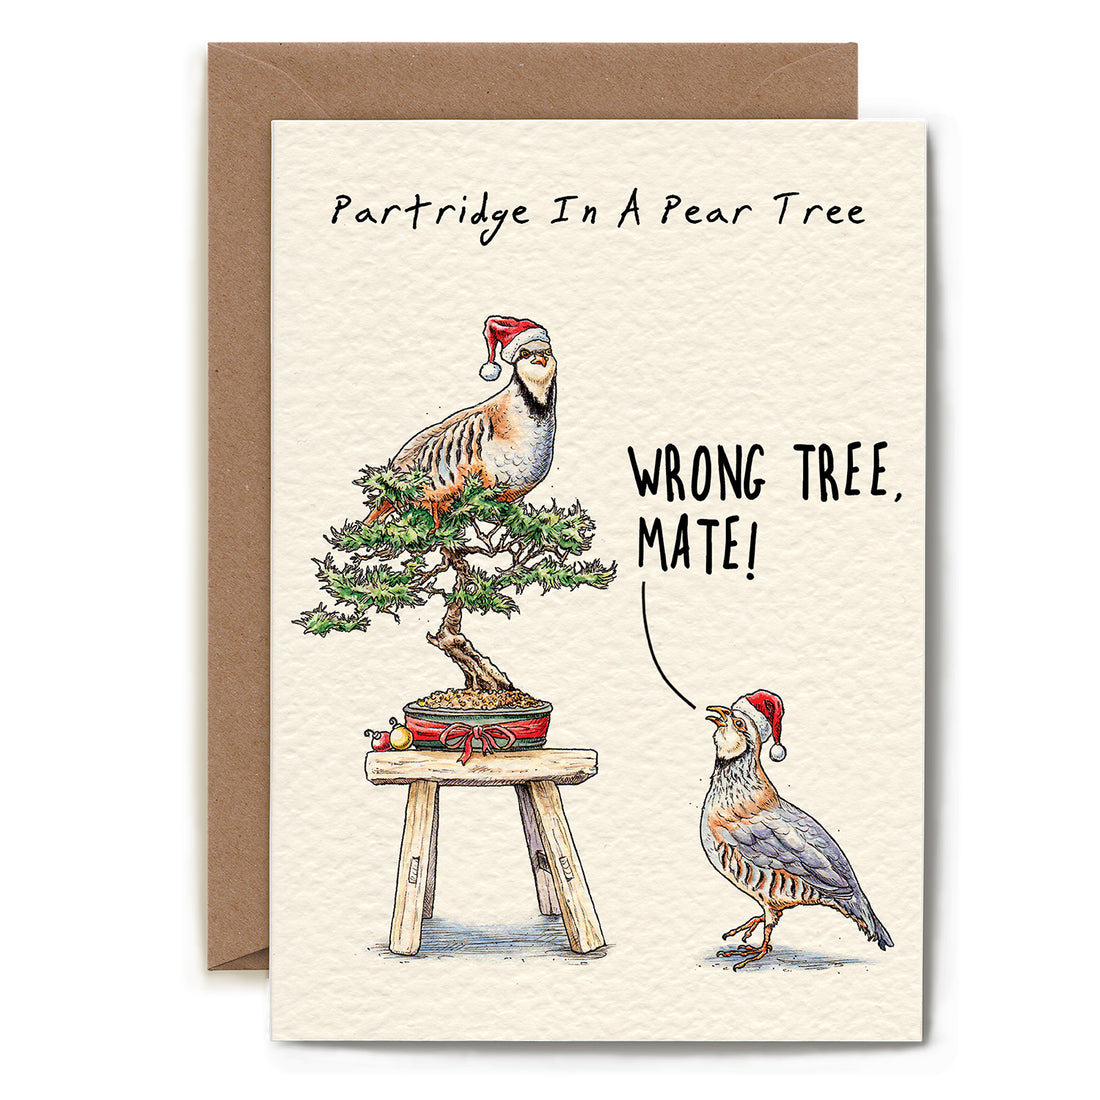 Partridge Christmas Card from Hester &amp; Cook, depicting a humorous twist on the &quot;partridge in a pear tree&quot; theme, with one bird perched atop a pine bonsai and the other making a